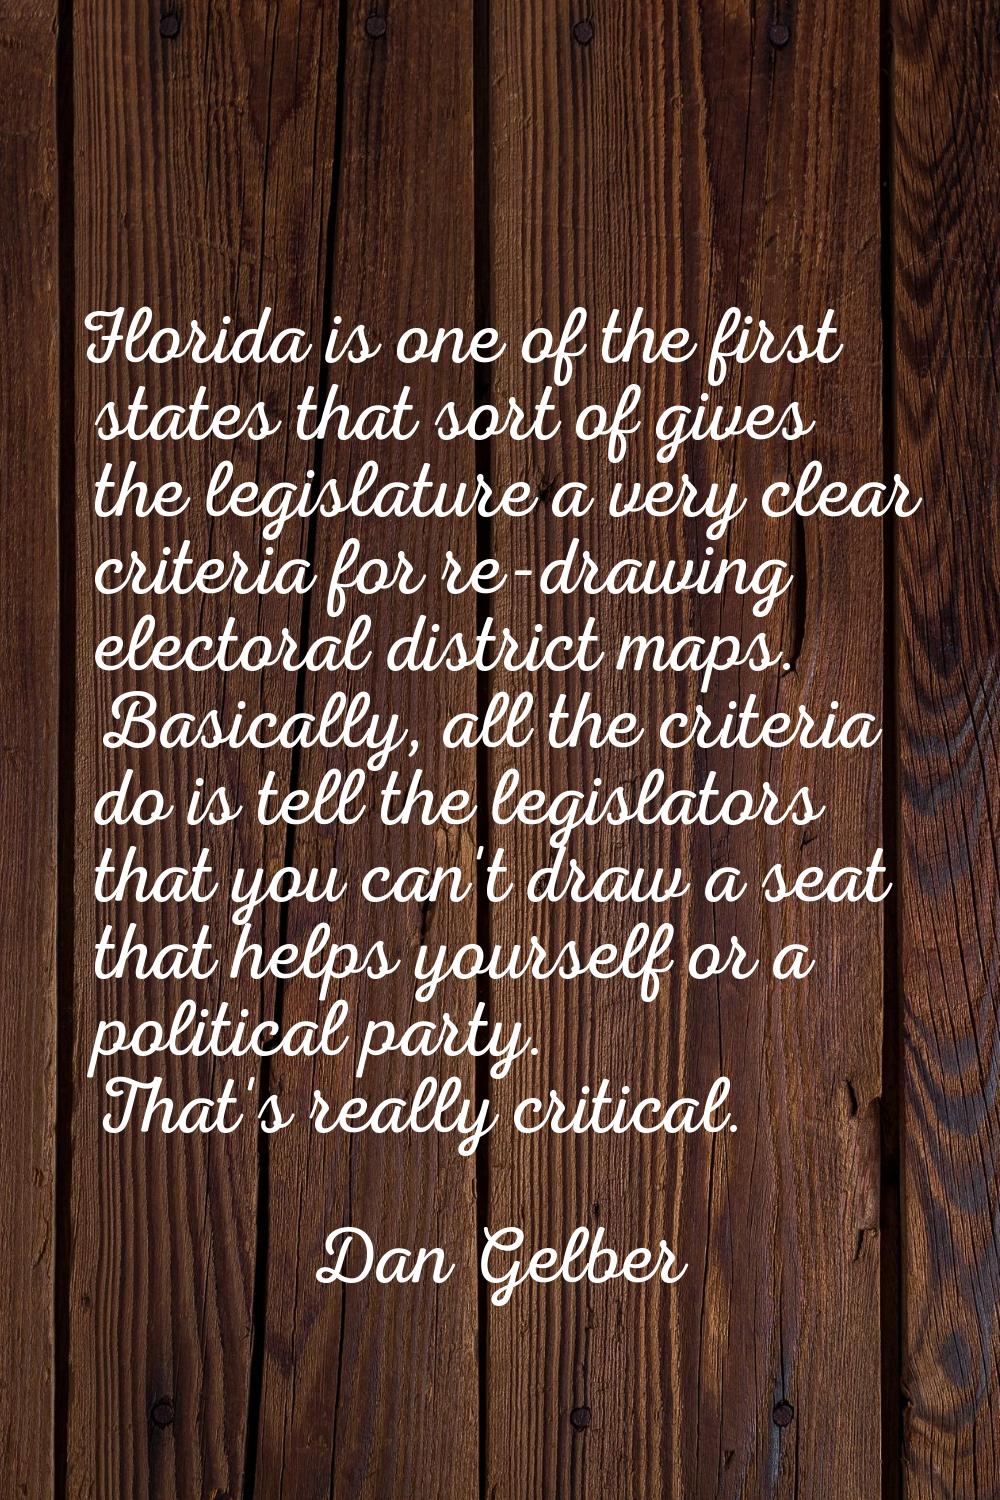 Florida is one of the first states that sort of gives the legislature a very clear criteria for re-